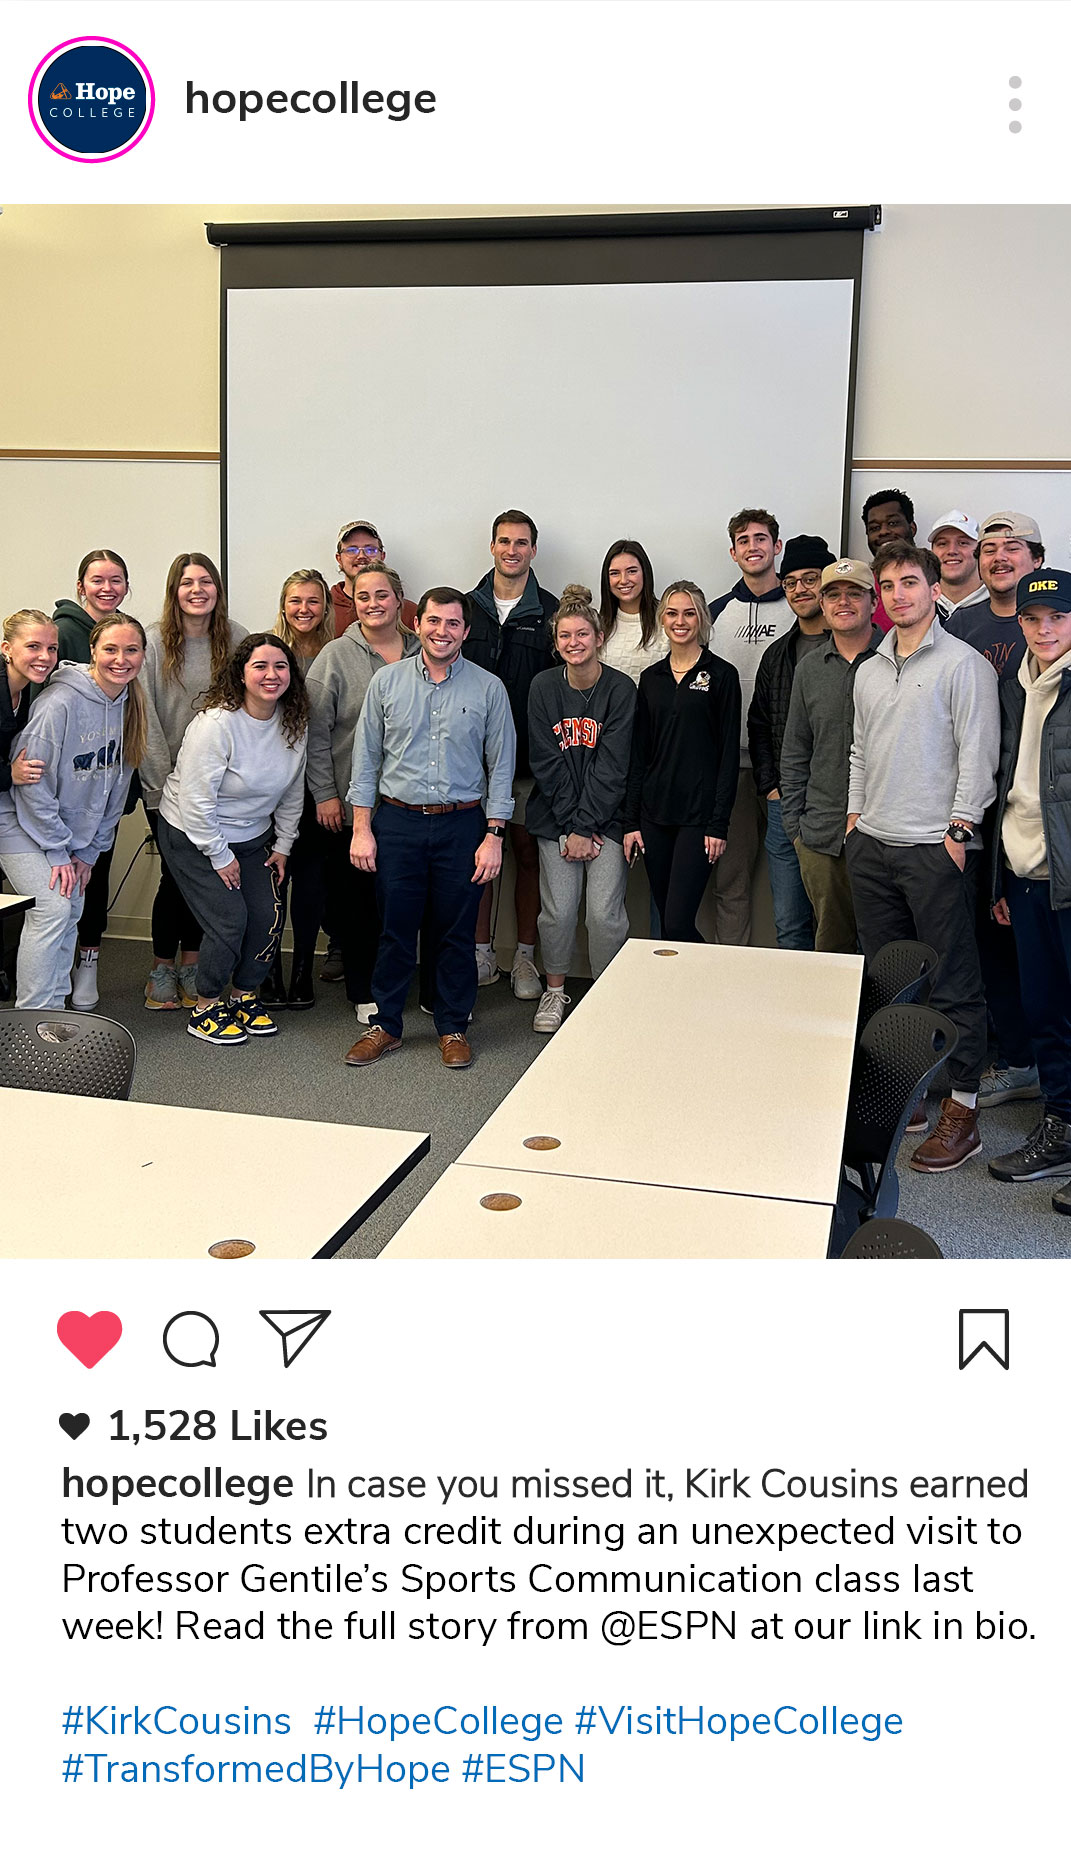 Kirk Cousins @KirkCousins8 "Two students stopped me after my PT session @ Hope...told me they'd get extra credit if I showed up to the class so I had to stop by. Professor Gentile, thanks for having me, but now I'm holding you to that extra credit!"